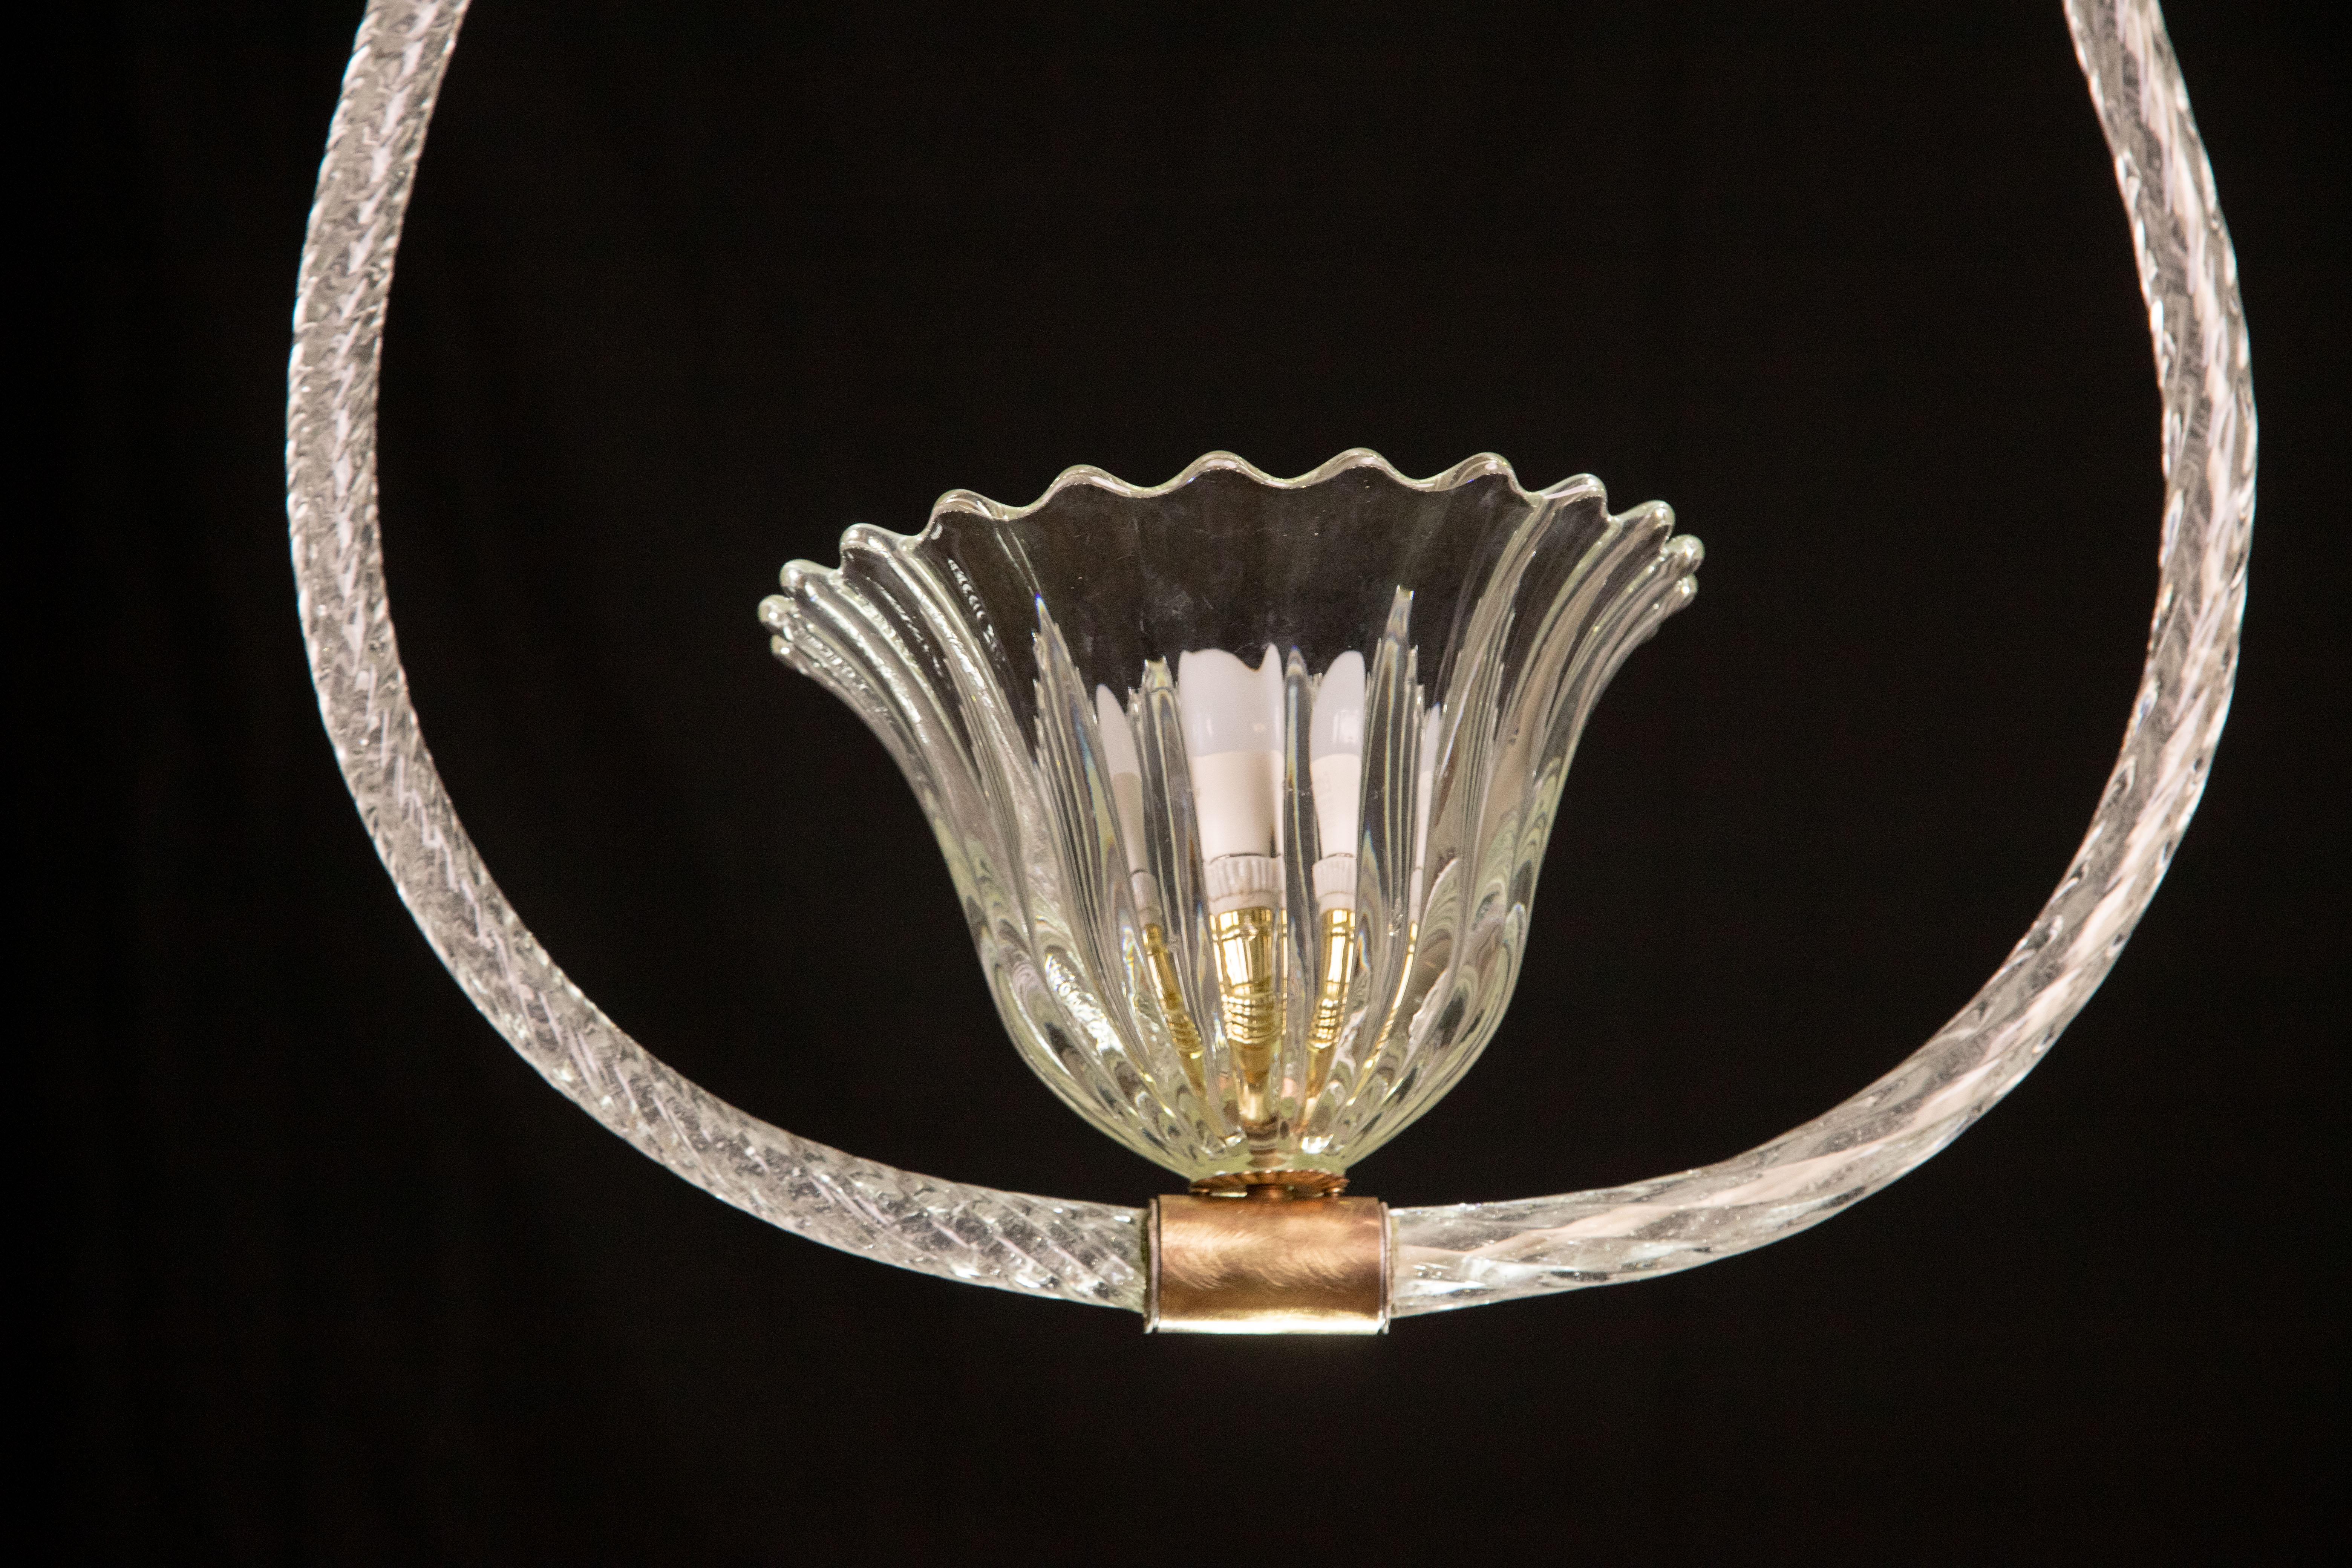 Set of 2 Barovier and Toso Light Pendant, Murano Glass, 1940s For Sale 5